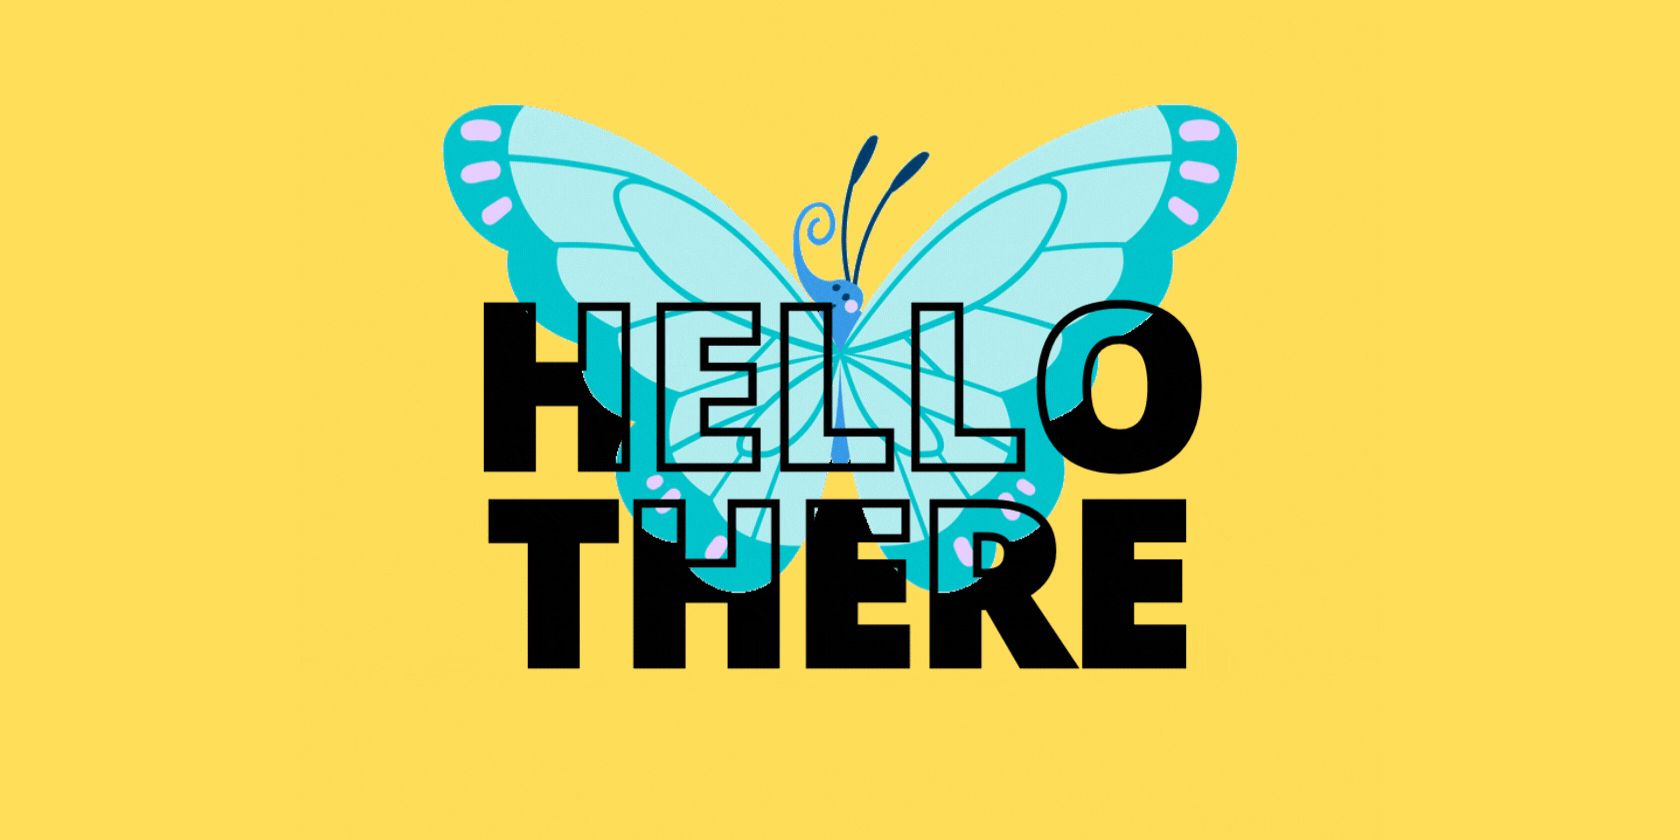 Yellow background with black text saying Hello There and a blue butterfly masked in the text.